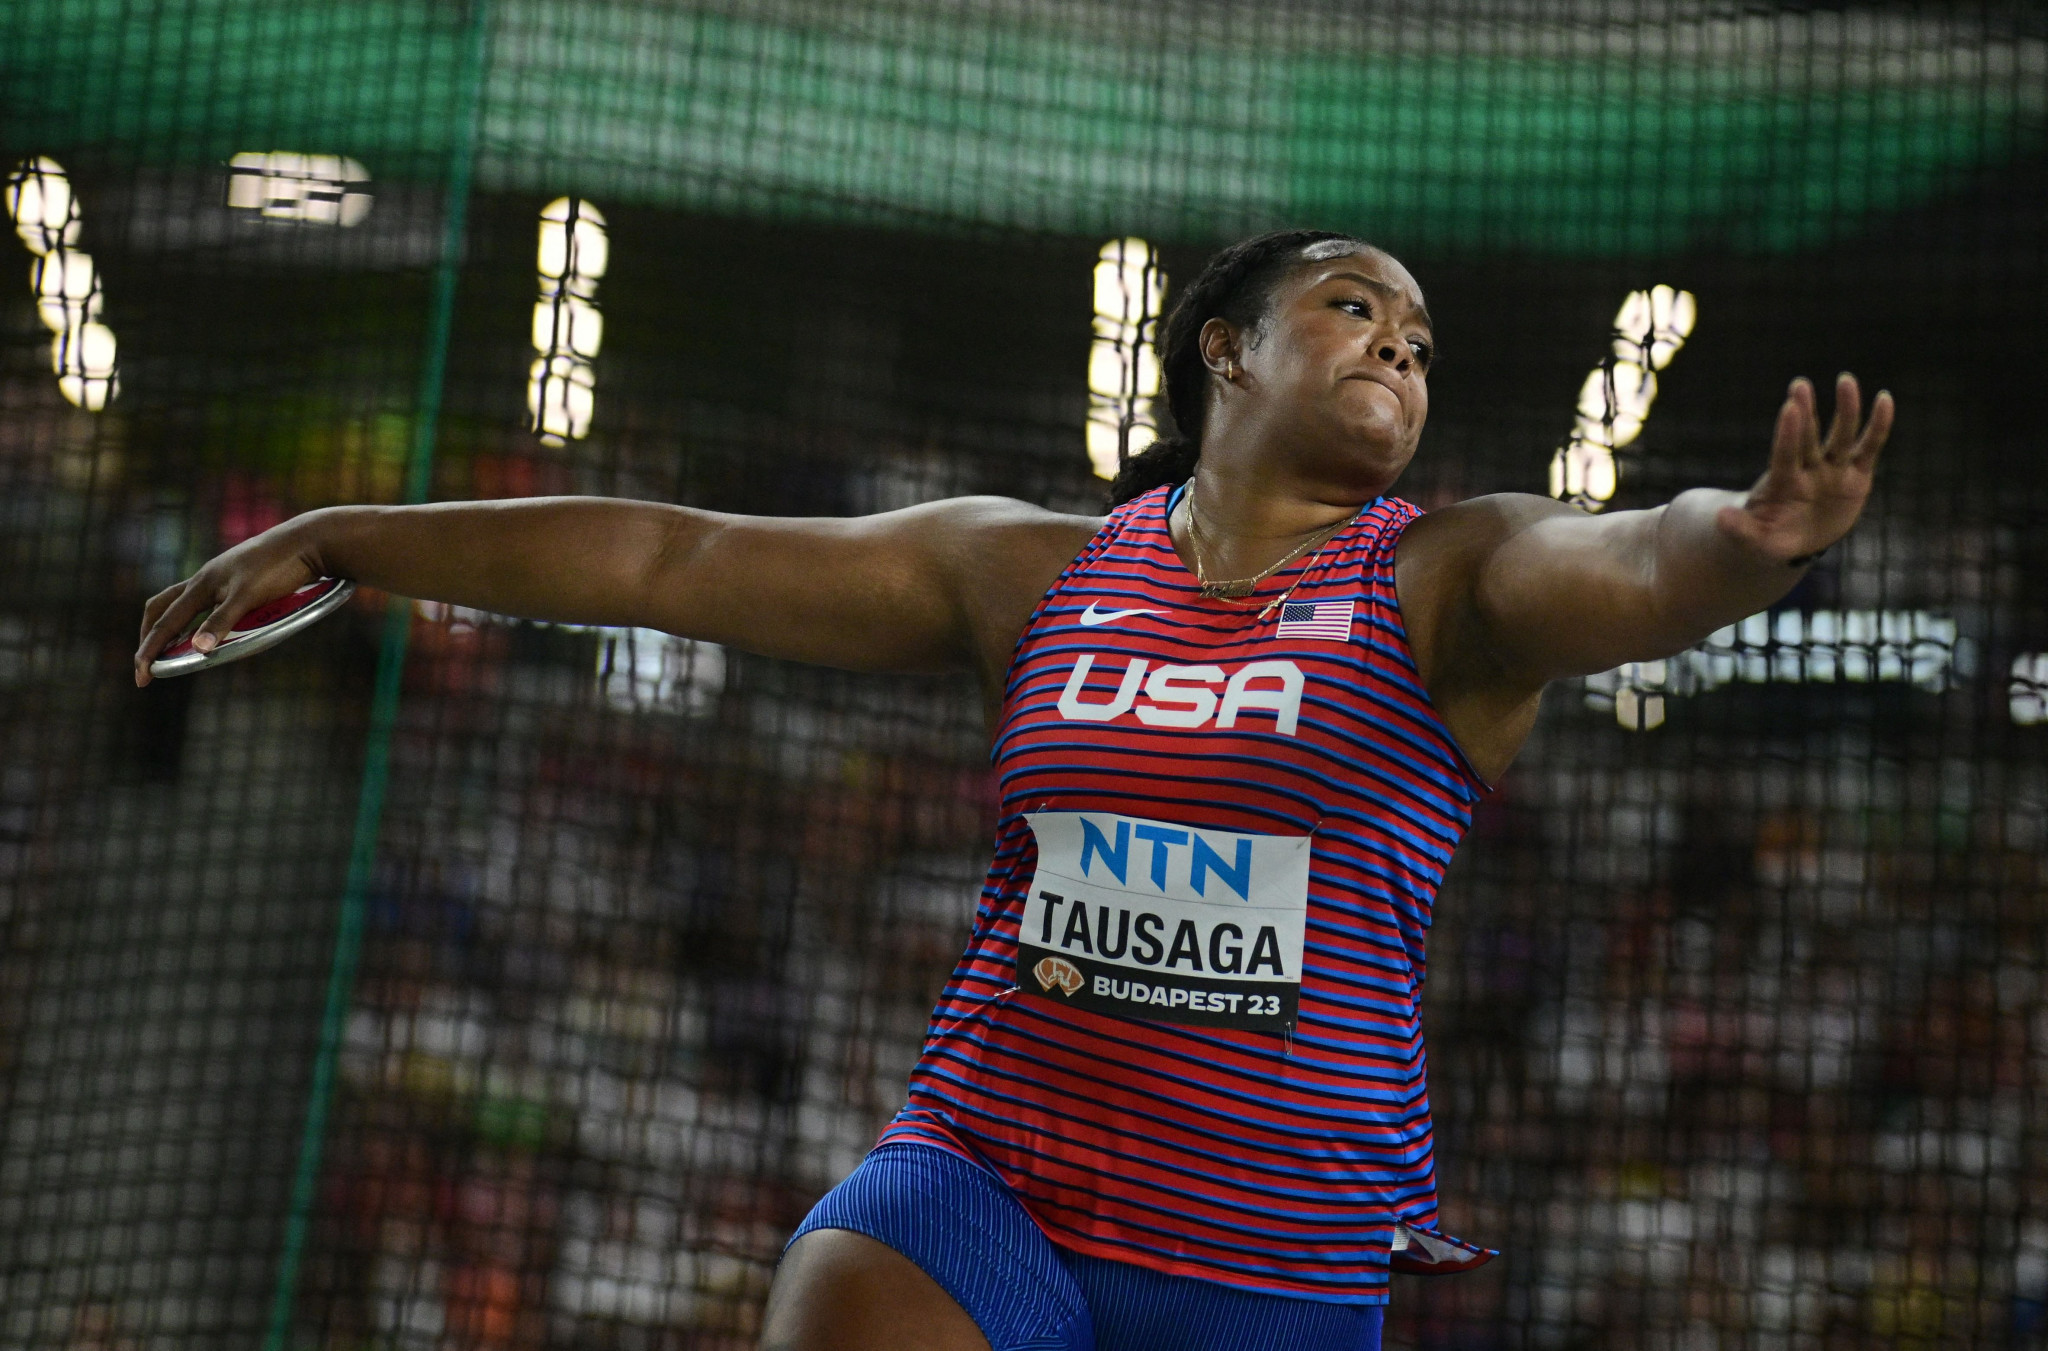 The United States' Laulauga Tausaga was a surprise winner of the women's discus throw ©Getty Images